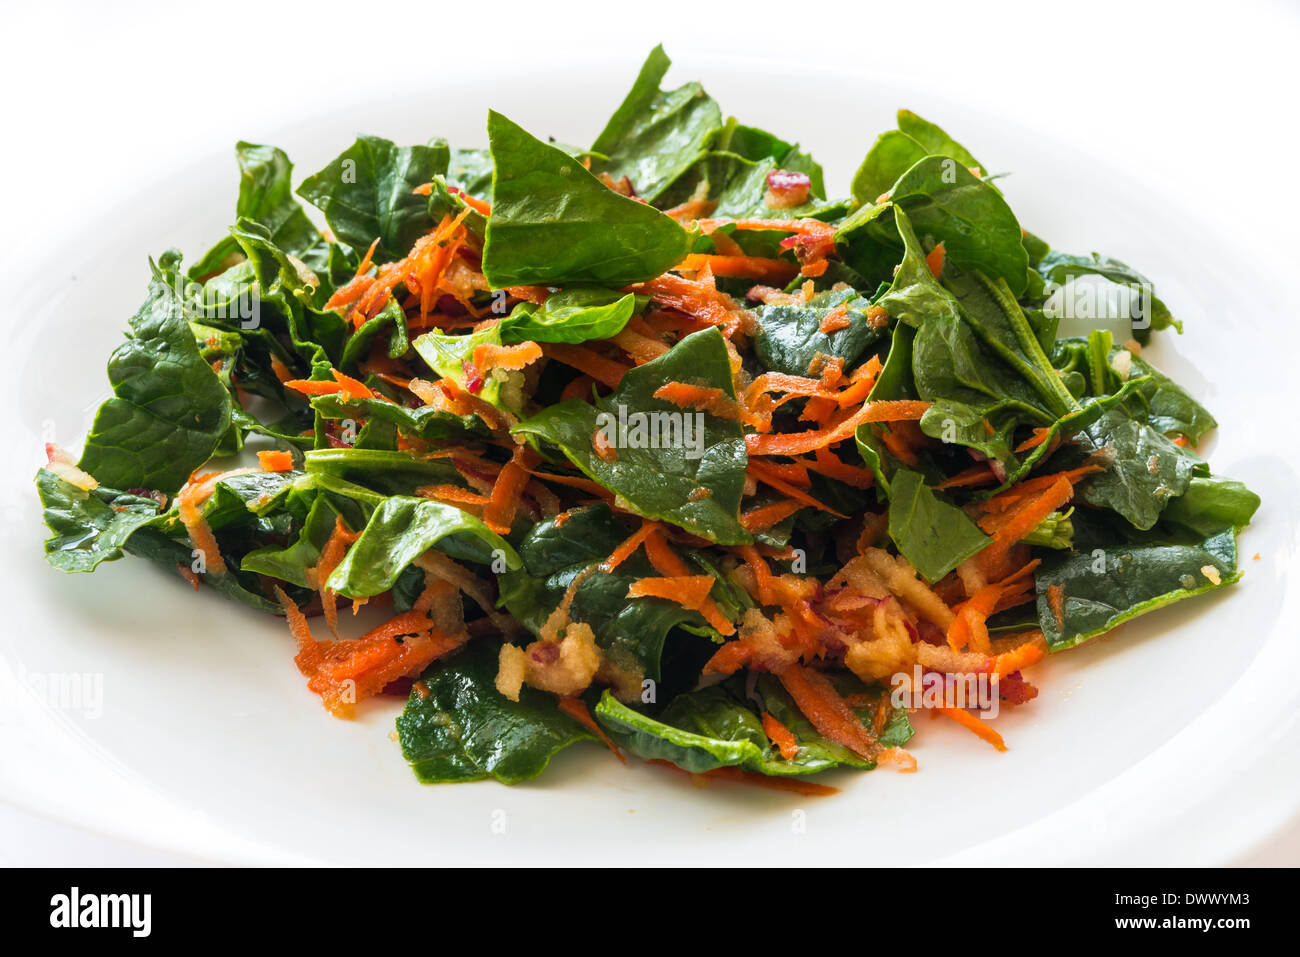 Mix vegetables salad with carrot, spinach and apple Stock Photo